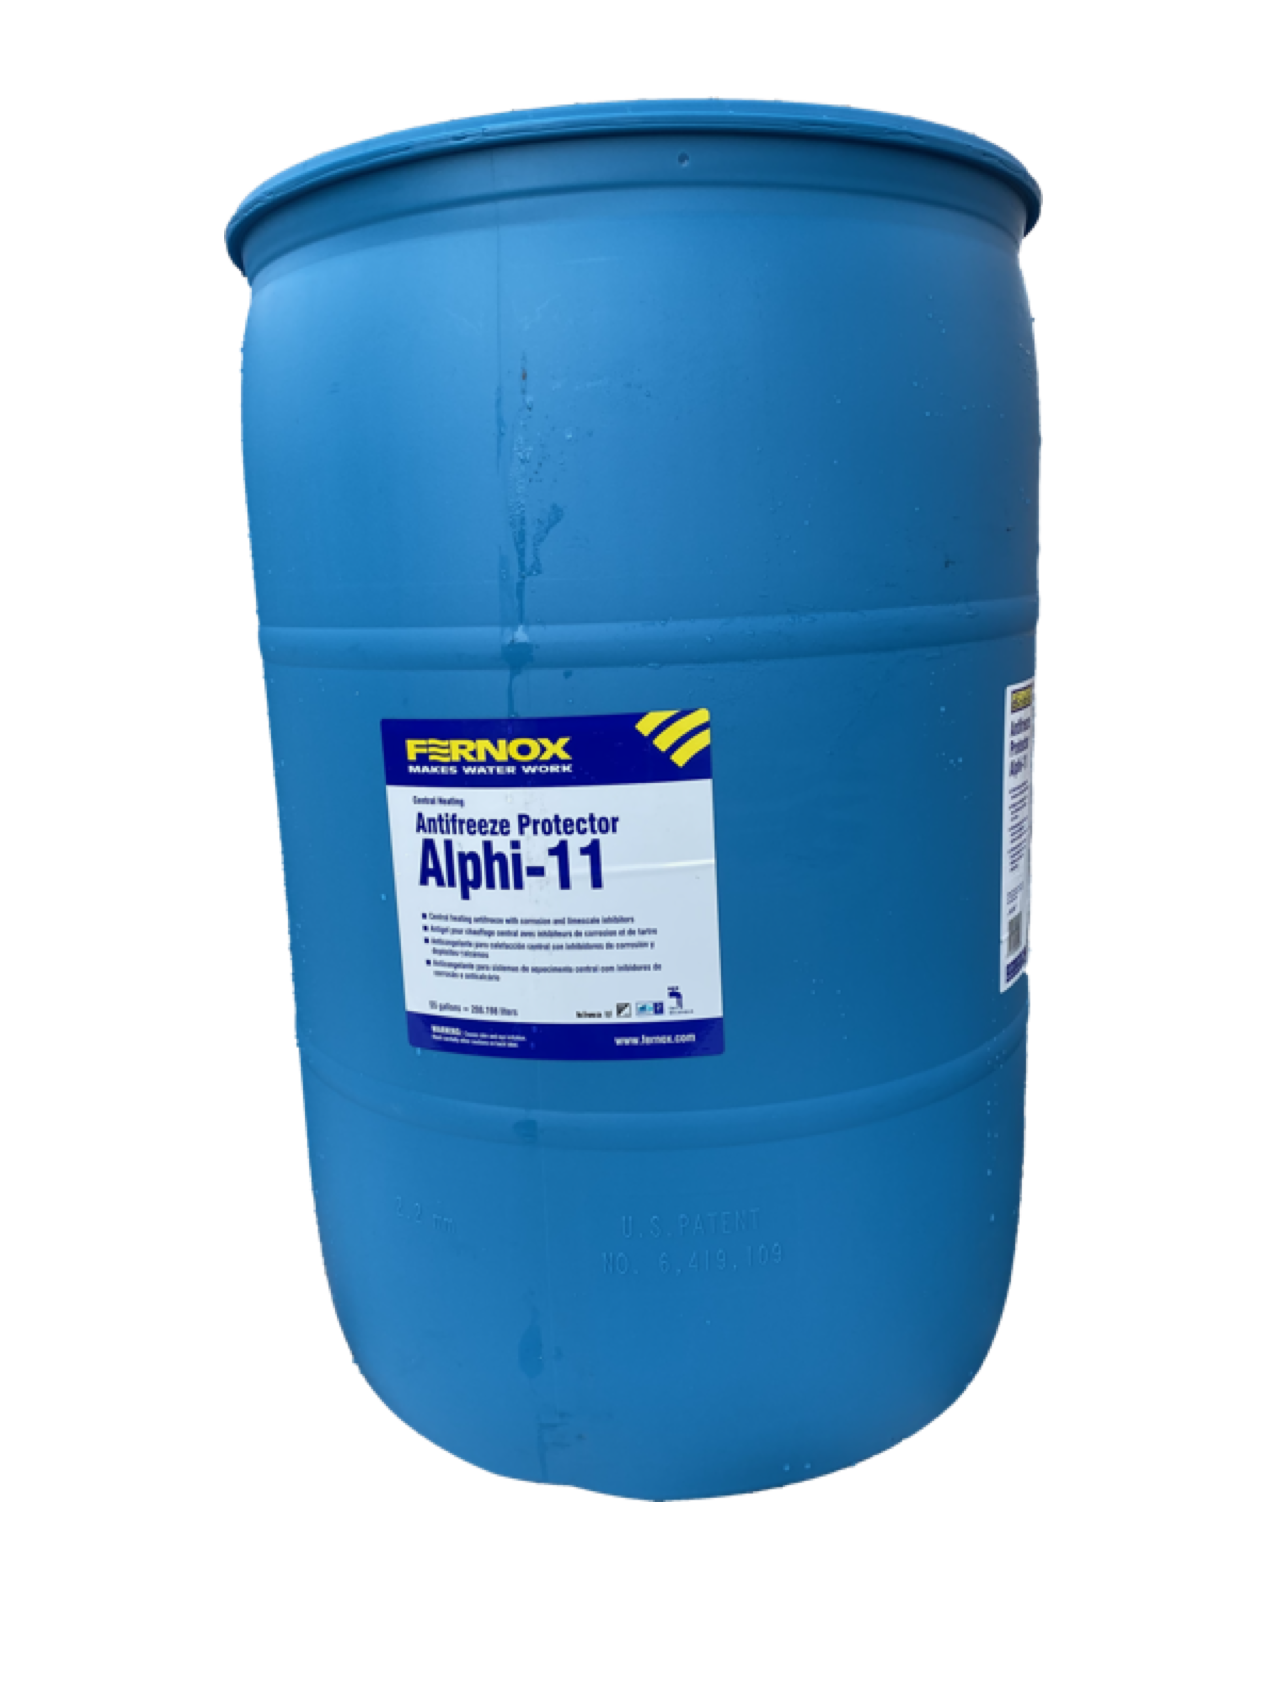 Alphi-11 Protector is a combined antifreeze & inhibitor providing protection against internal corrosion and limescale formation. 55 Gallon